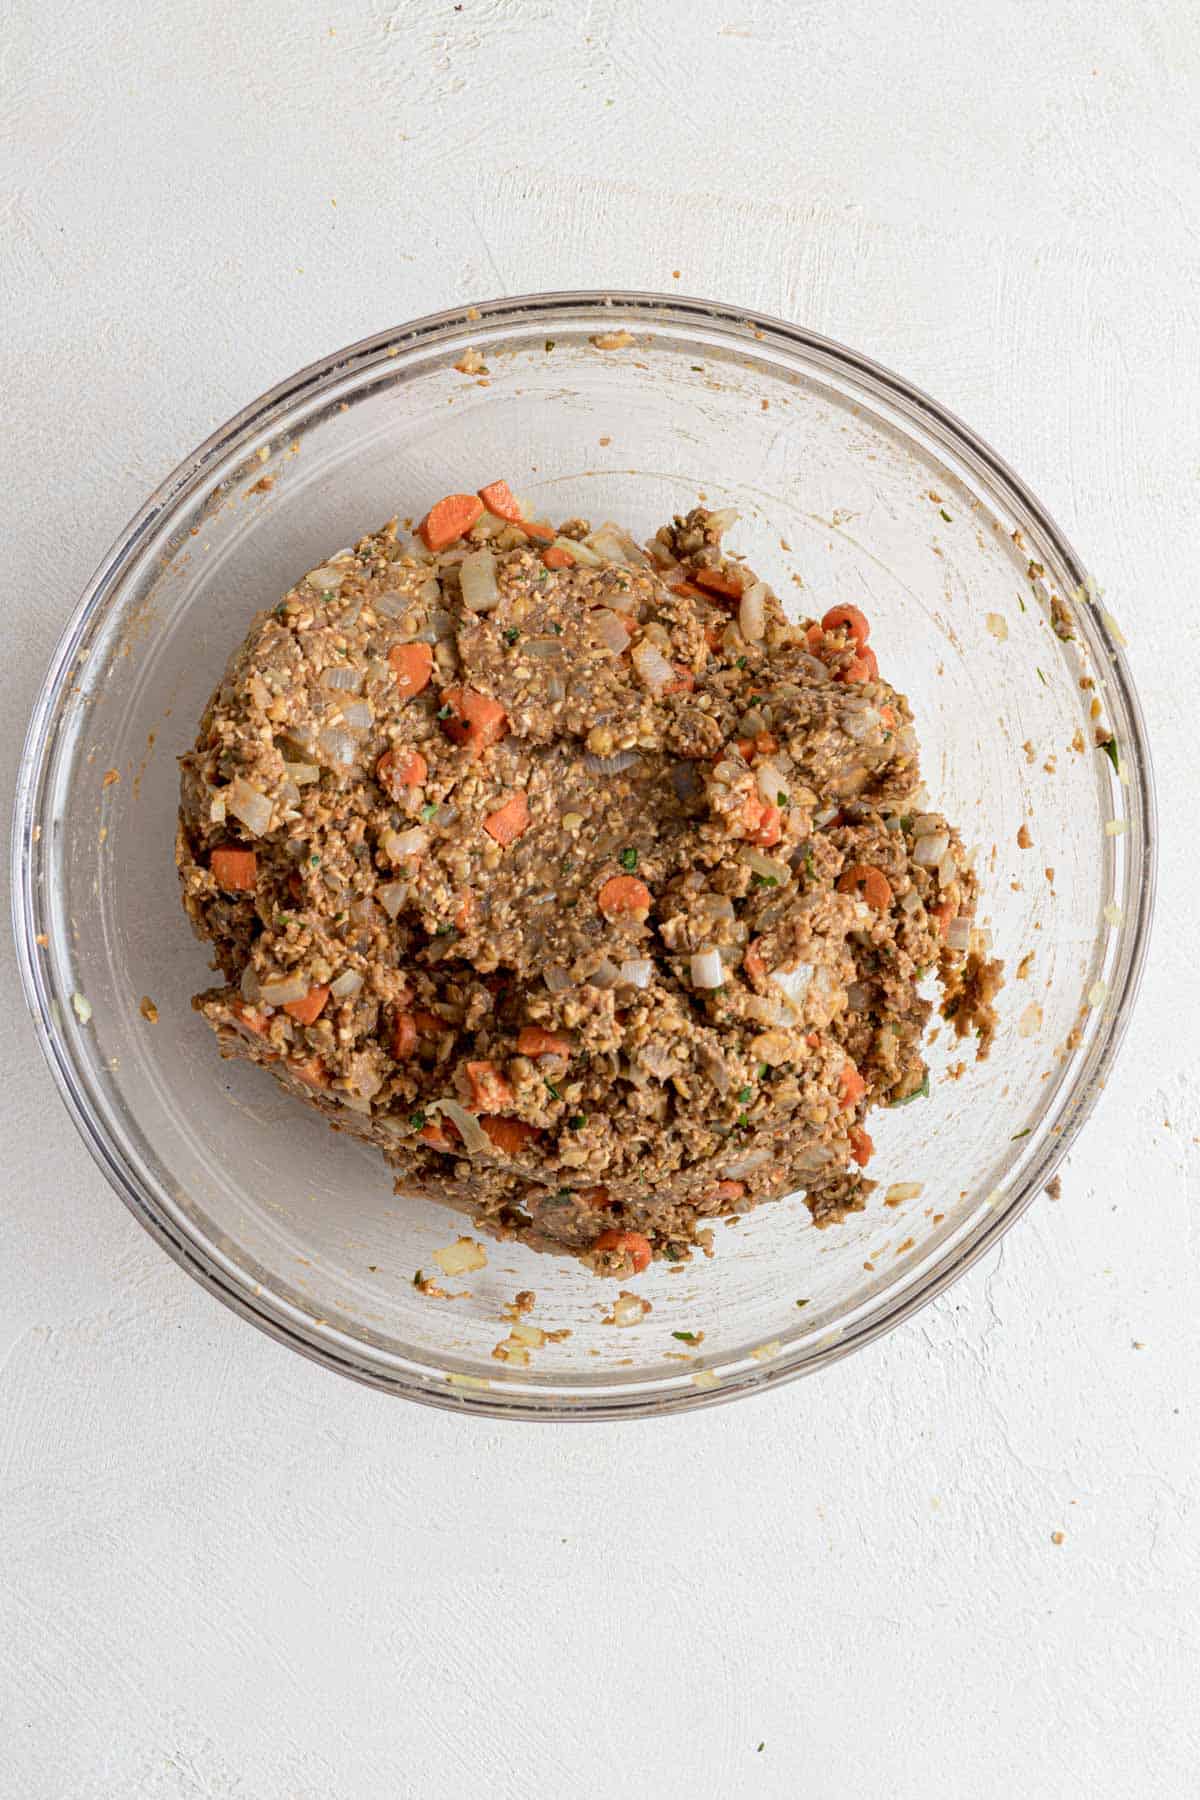 Sautéed onion, garlic, and carrots mixed into the final meatloaf mixture.